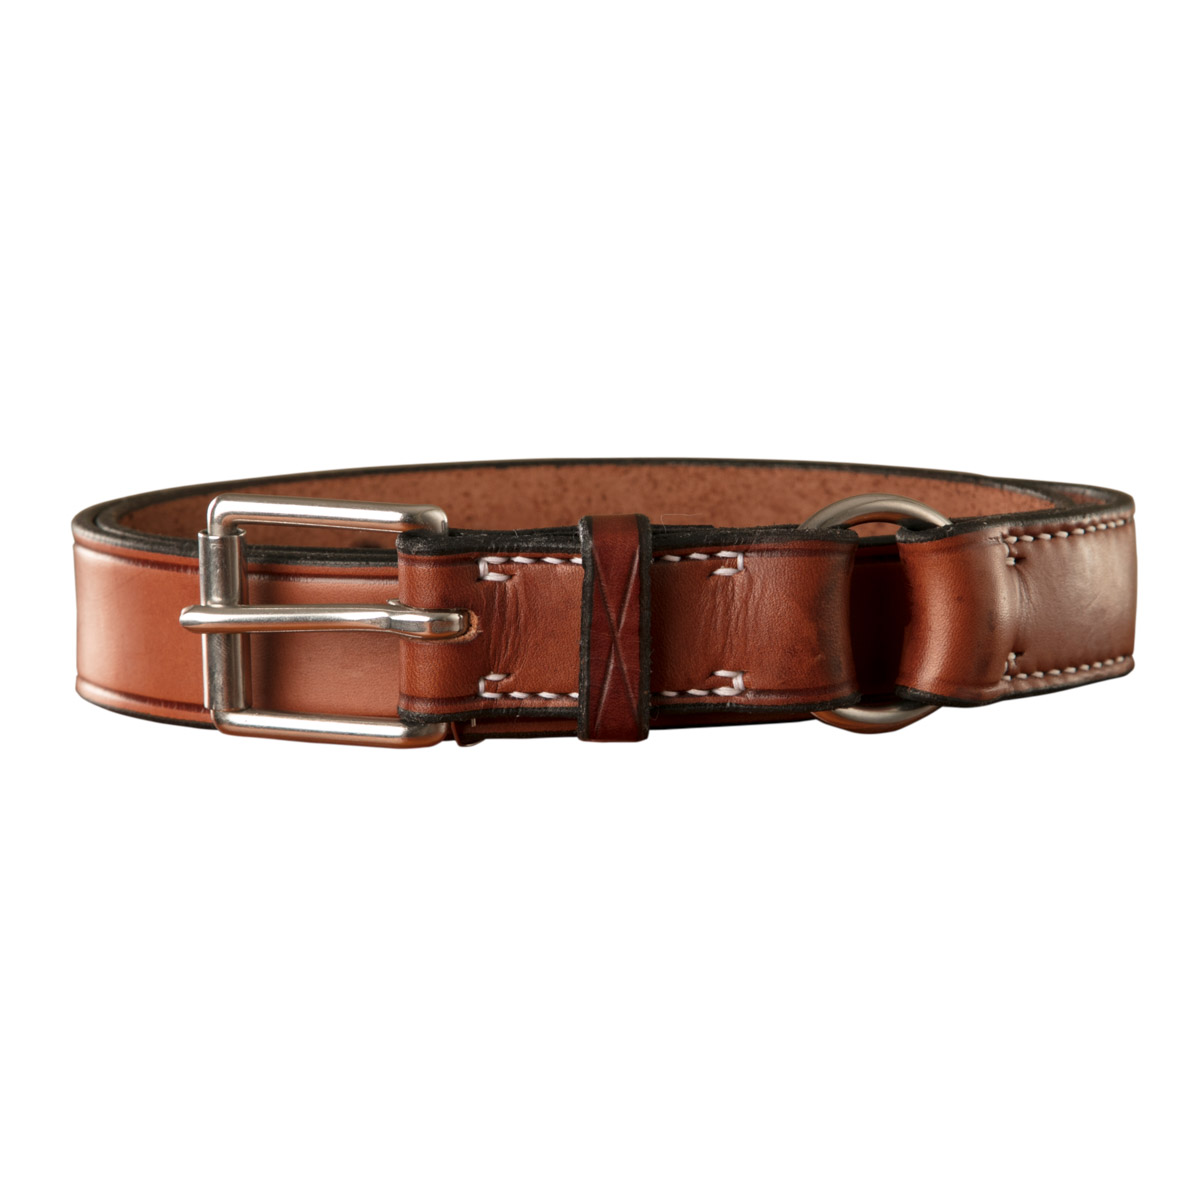 Stockmans Belt, Solid Leather, with Stainless Steel Roller Buckle and Ring 1